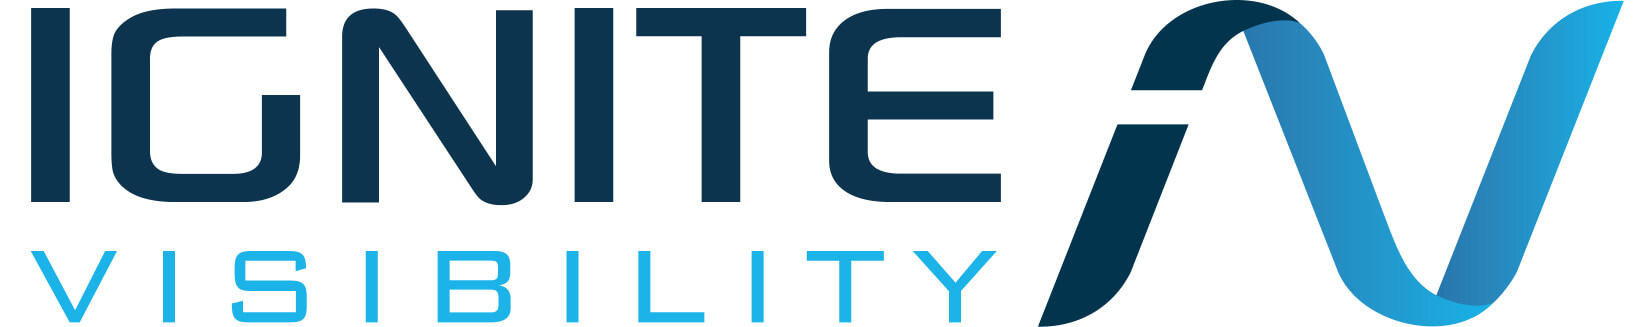 Top ORM Firm Logo: Ignite Visibility